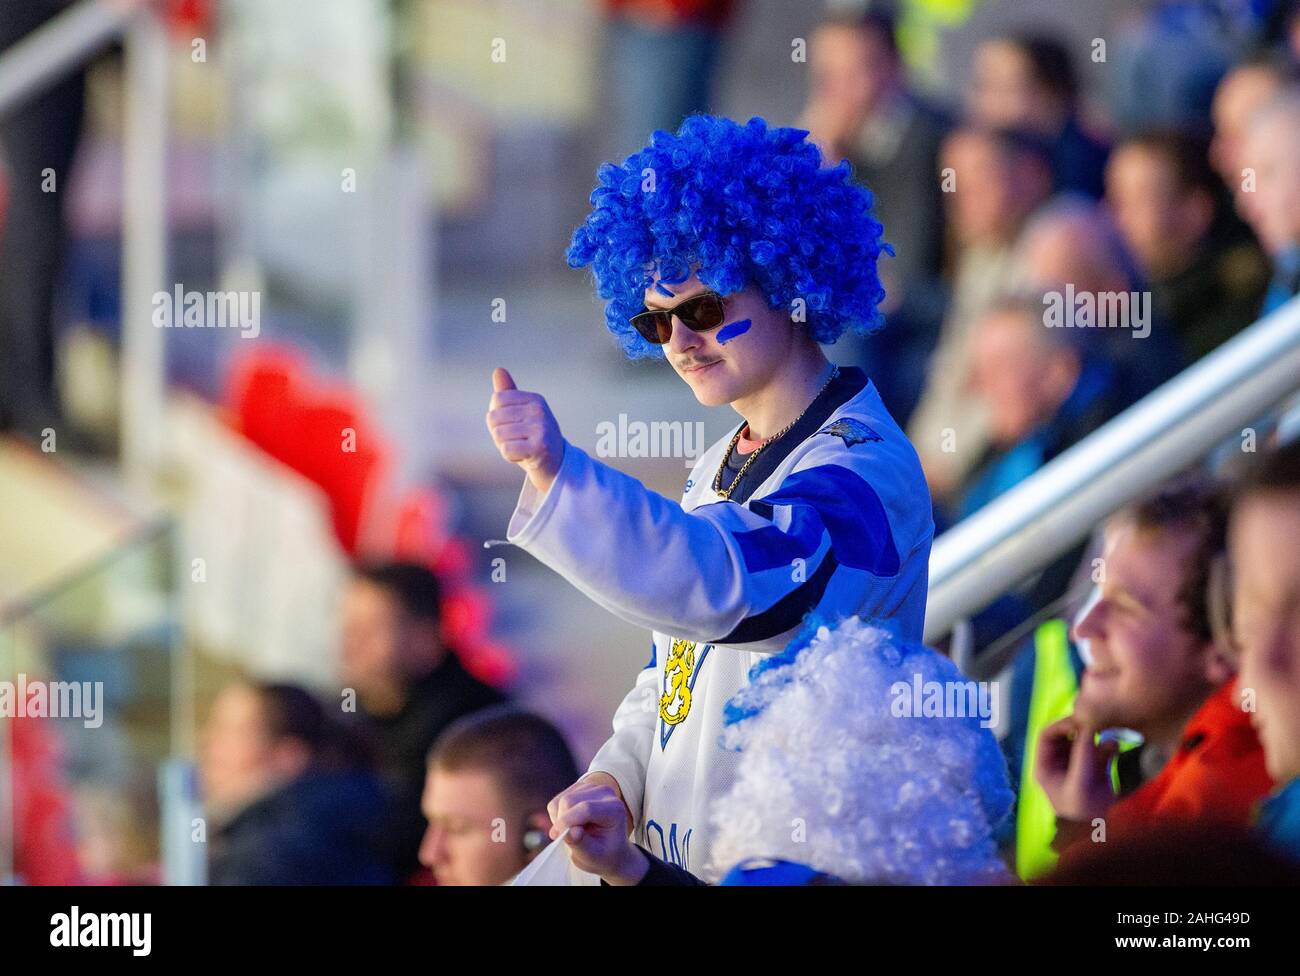 A Finnish ice hockey fan is seen during the 2020 IIHF World Junior Ice Hockey Championships Group A match between Kazakhstan and Finland in Trinec, Czech Republic, on December 29, 2019. (CTK Photo/Vladimir Prycek) Stock Photo